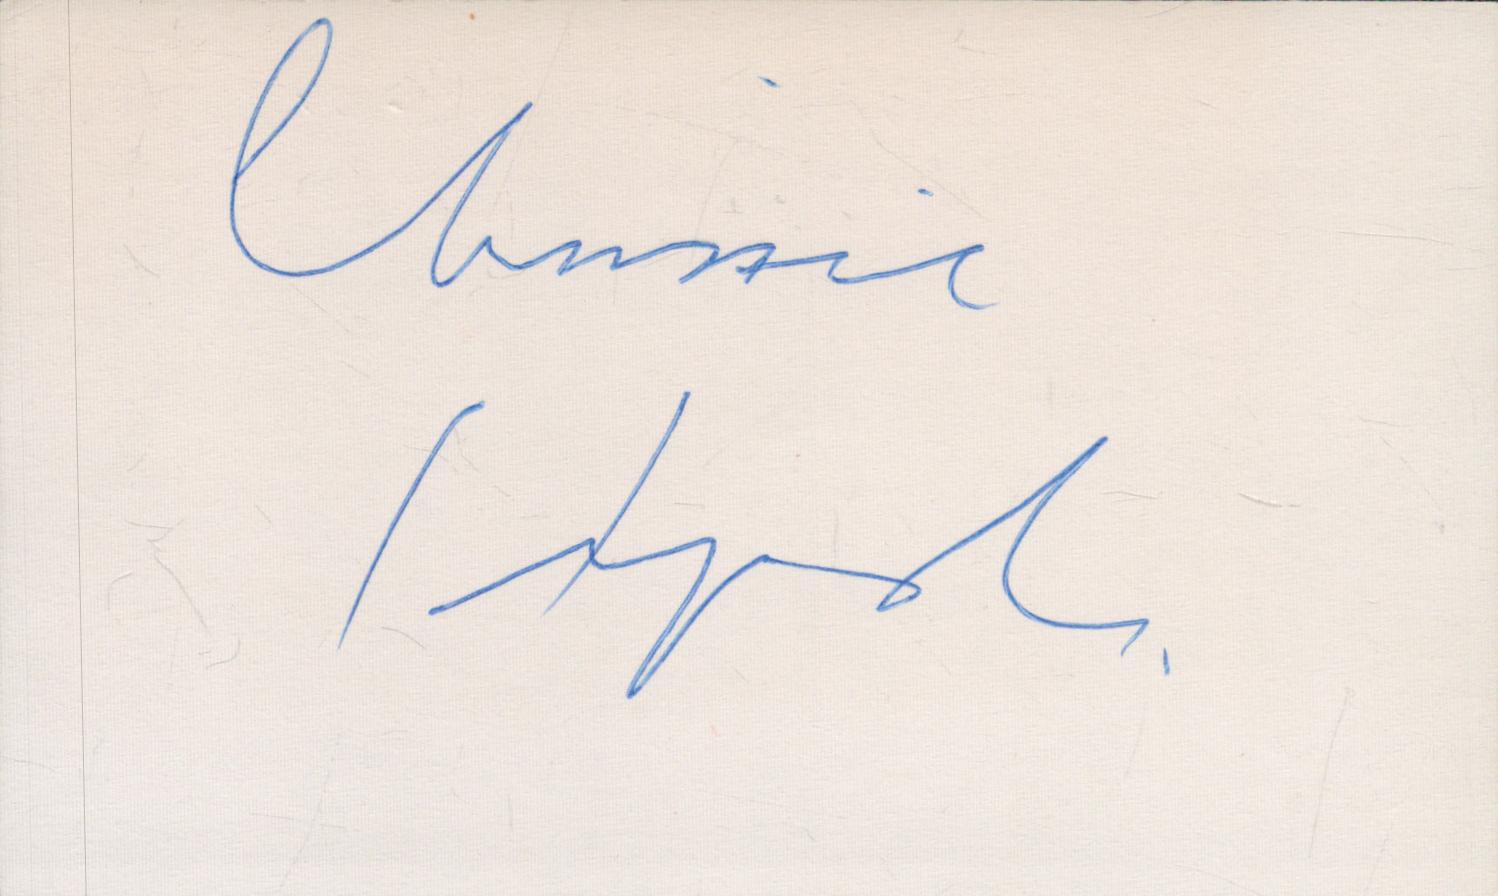 Chrissie Hynde signed 5x3 inch white card. Good Condition. All autographs come with a Certificate of